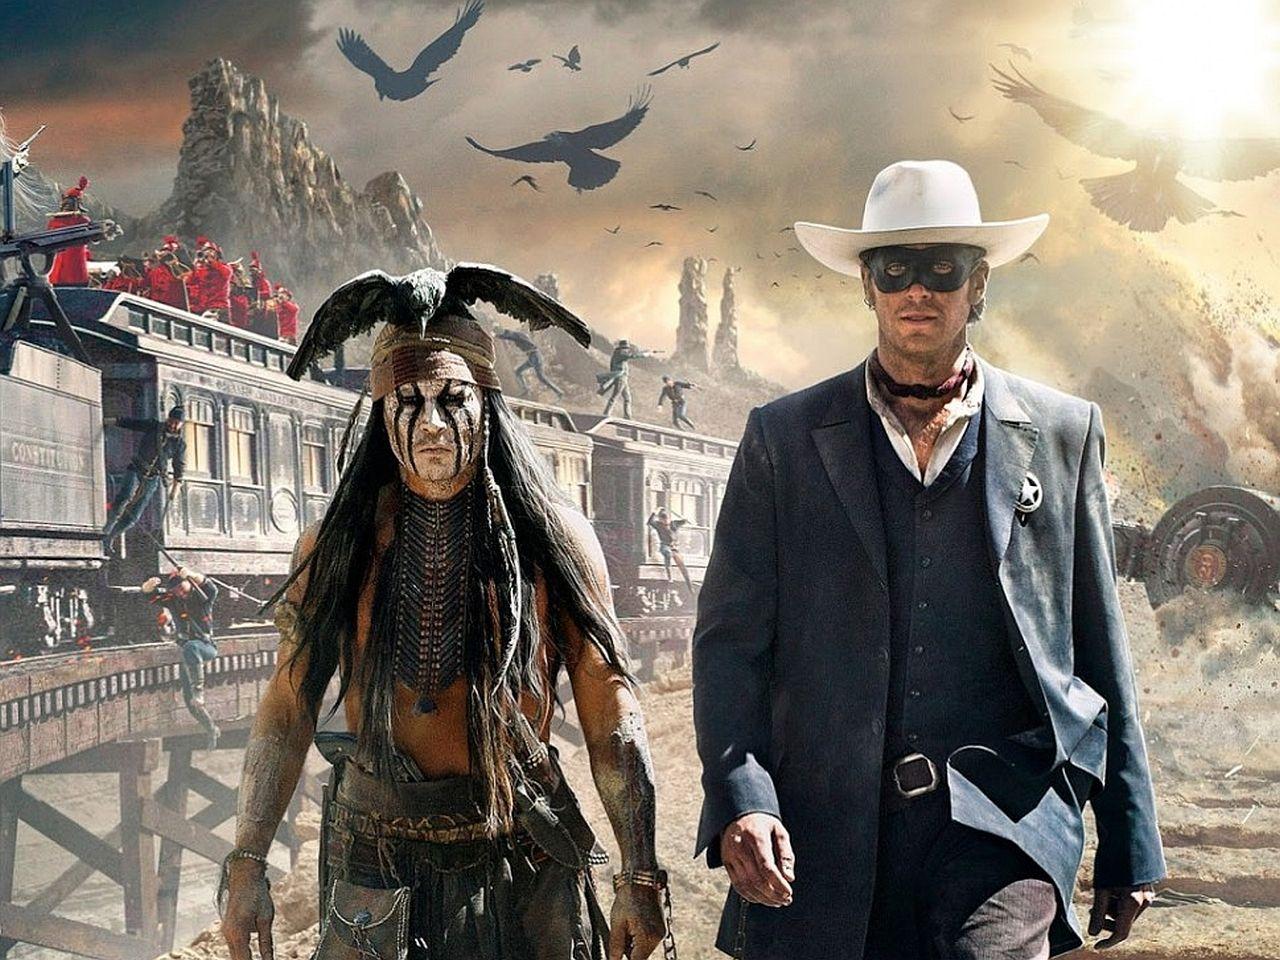 The Lone Ranger Wallpapers